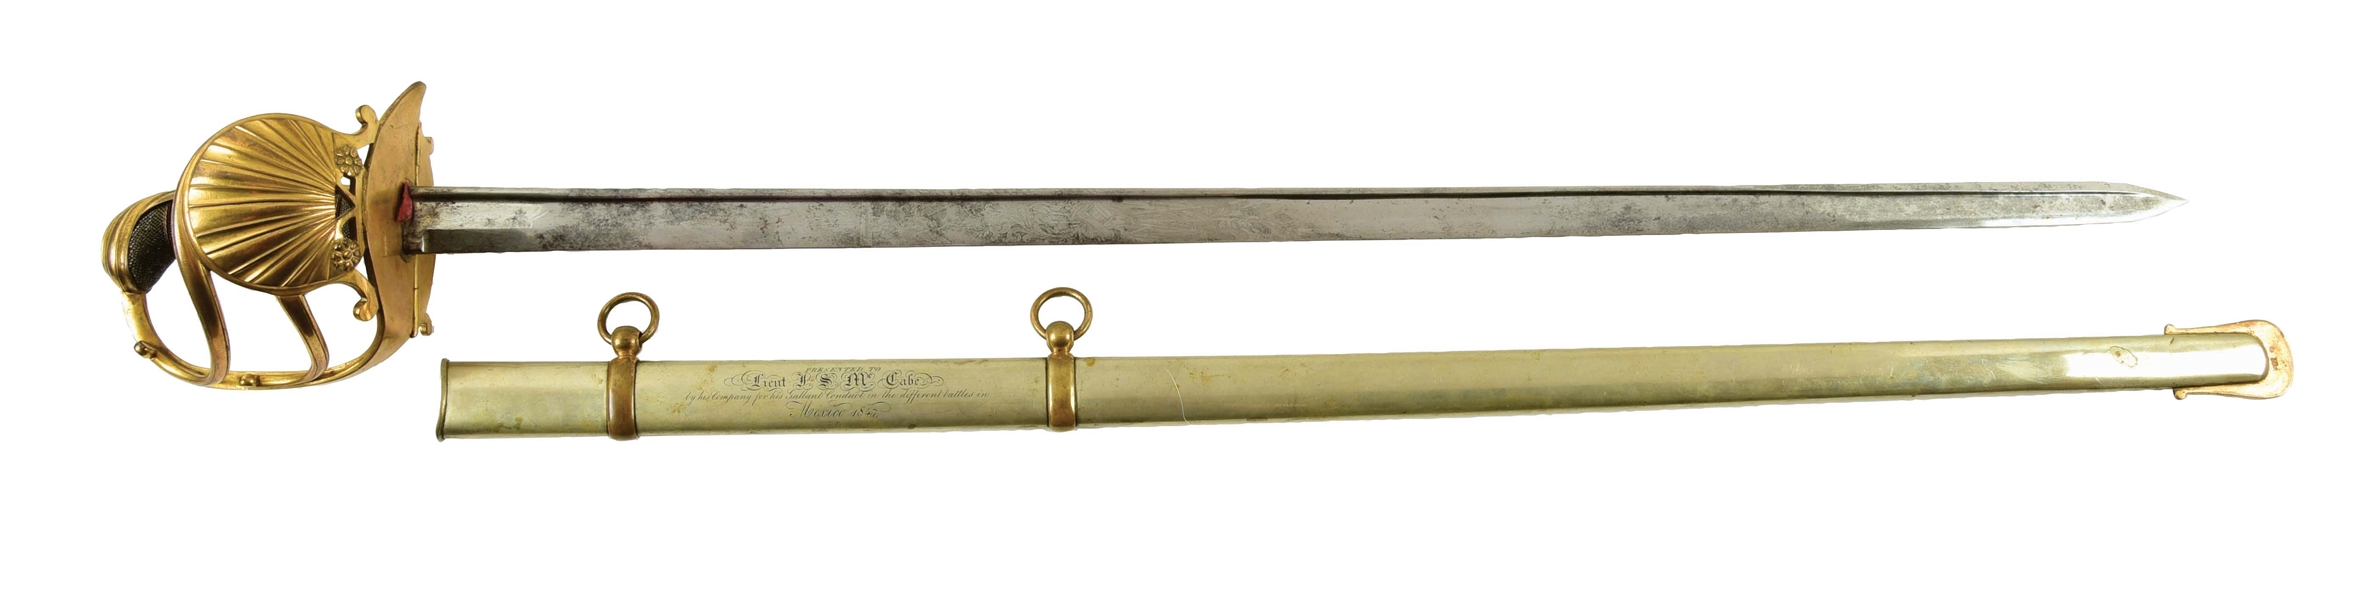 ATTRACTIVE CAPTURED MEXICAN STAFF OFFICER SWORD PRESENTED TO 2ND NEW YORK VOLUNTEERS LIEUTENANT J.S. MCCABE